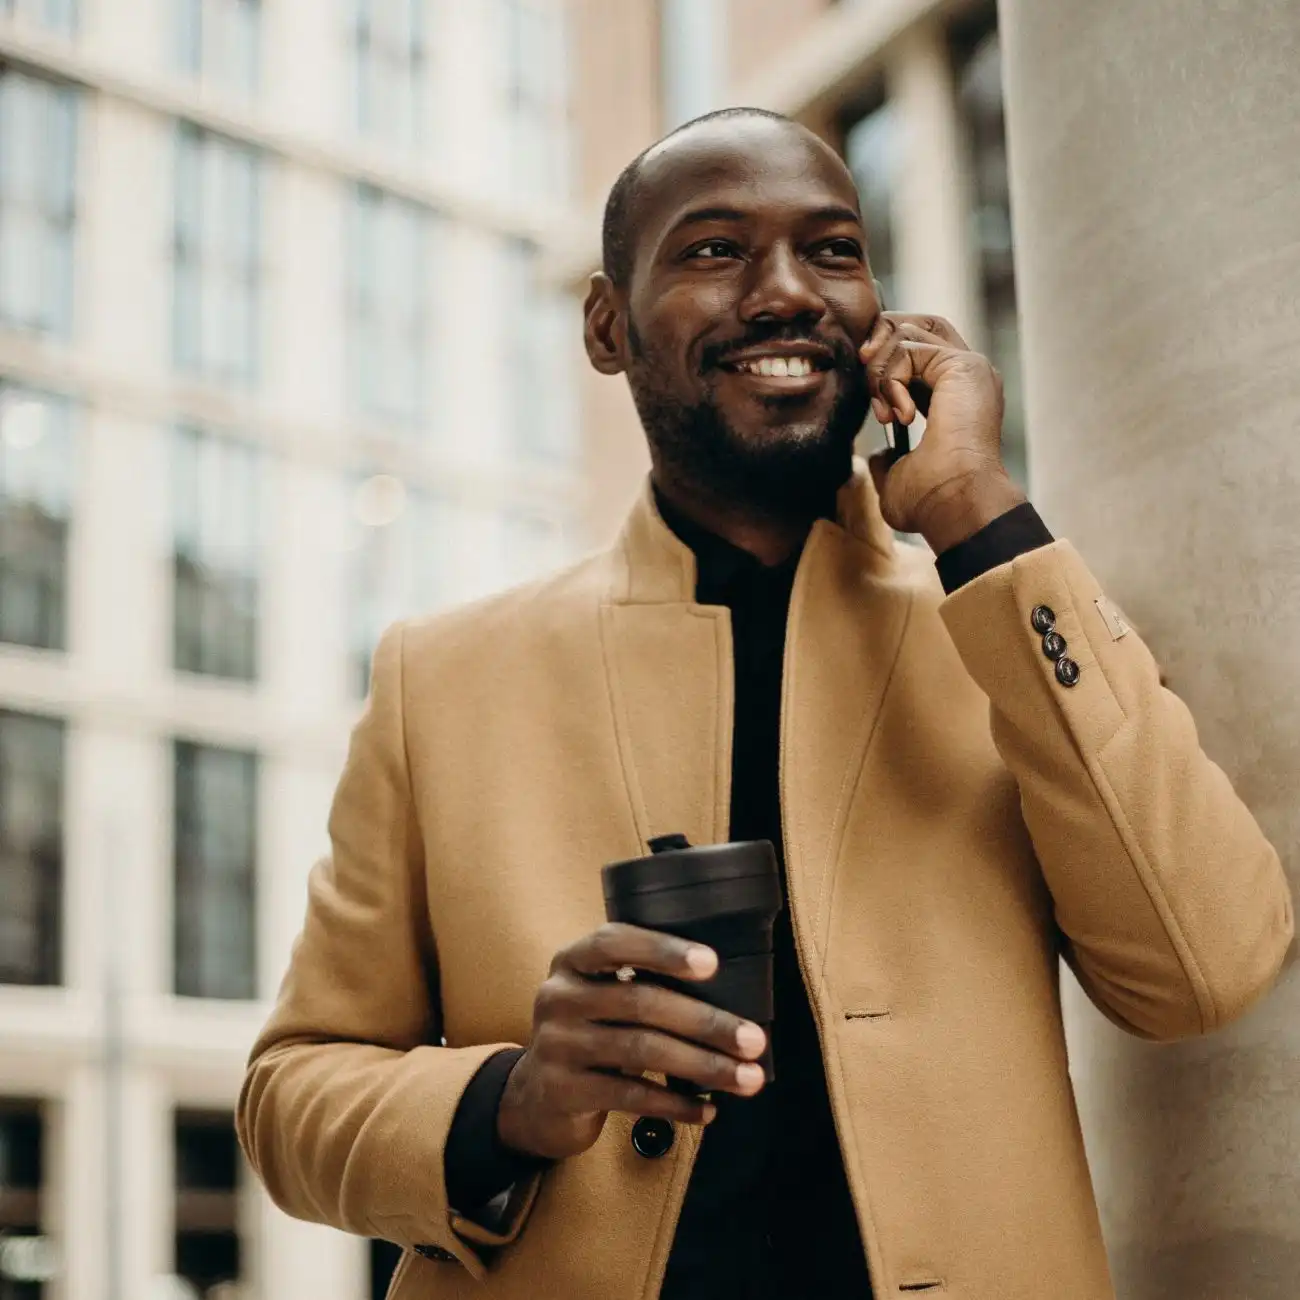 Well-dressed black male talking on smartphone with a reusable coffee mug in hand